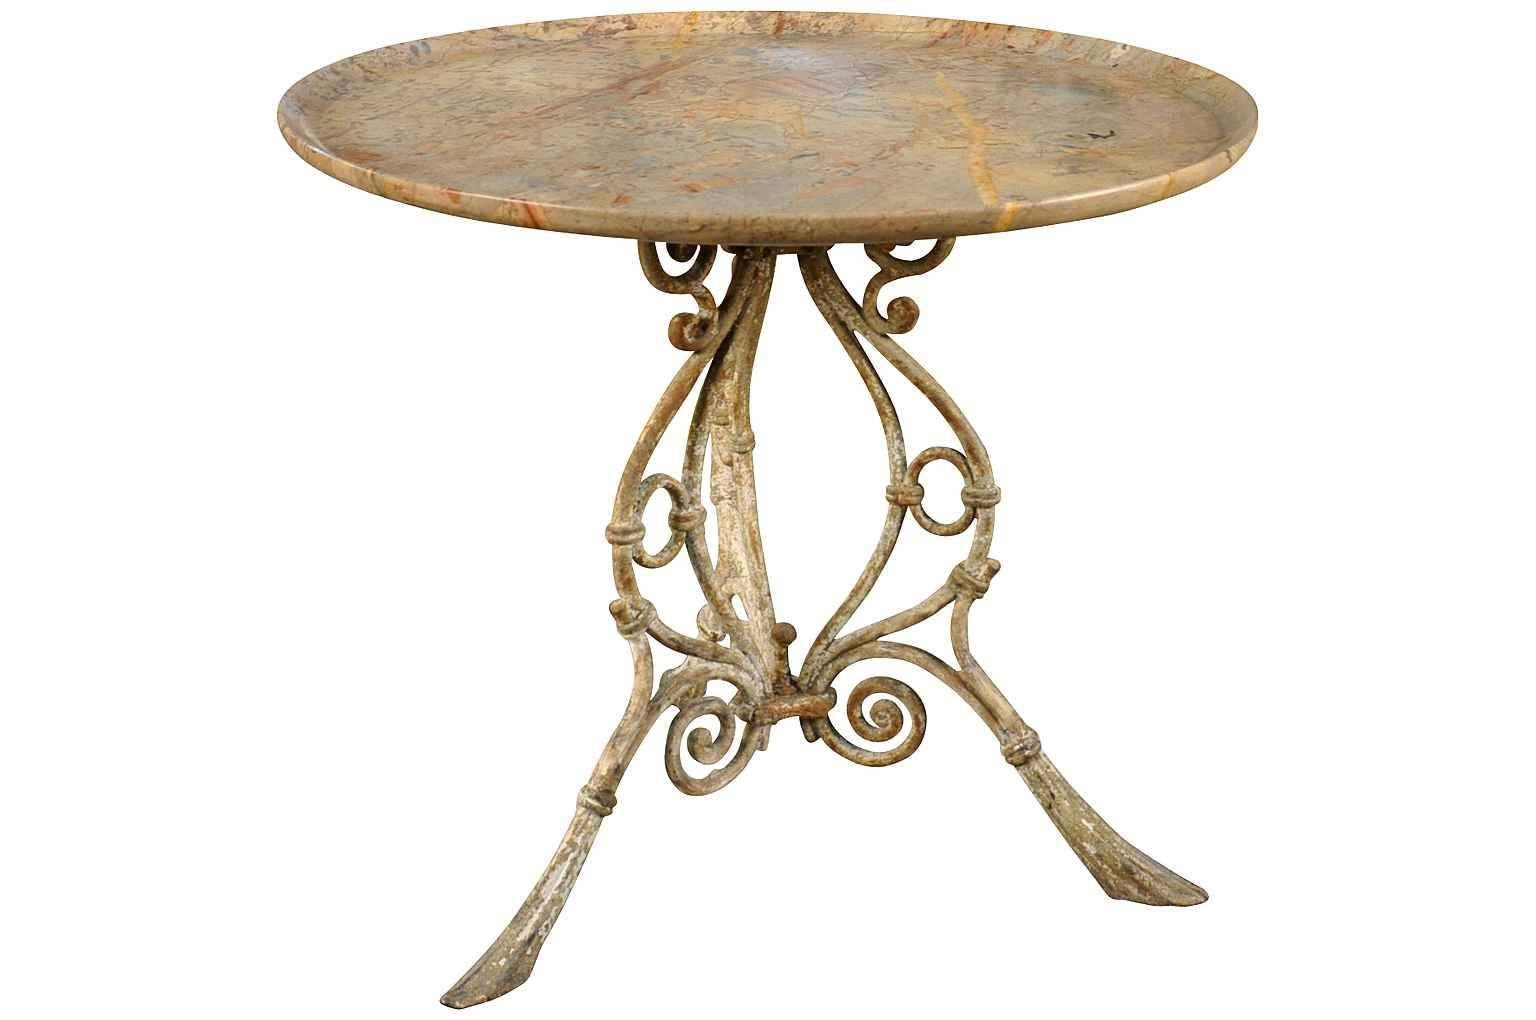 An outstanding 19th century Gueridon from the Provenance region of France. Terrific painted iron base with a unique sculpted marble top. A perfect table for any interior of garden.